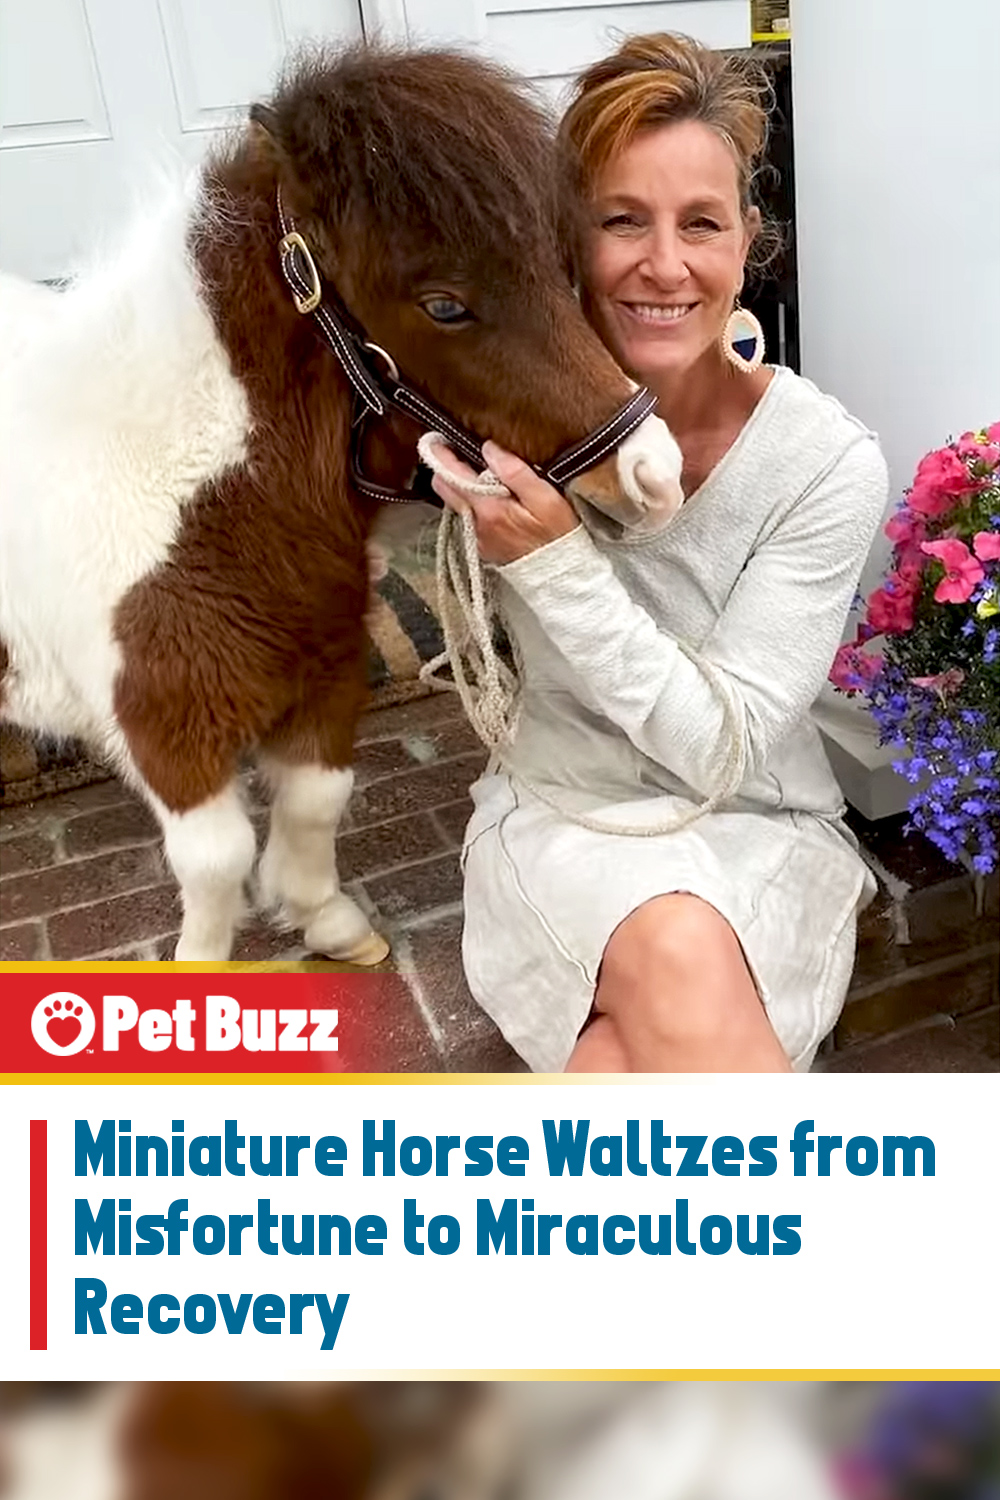 Miniature Horse Waltzes from Misfortune to Miraculous Recovery